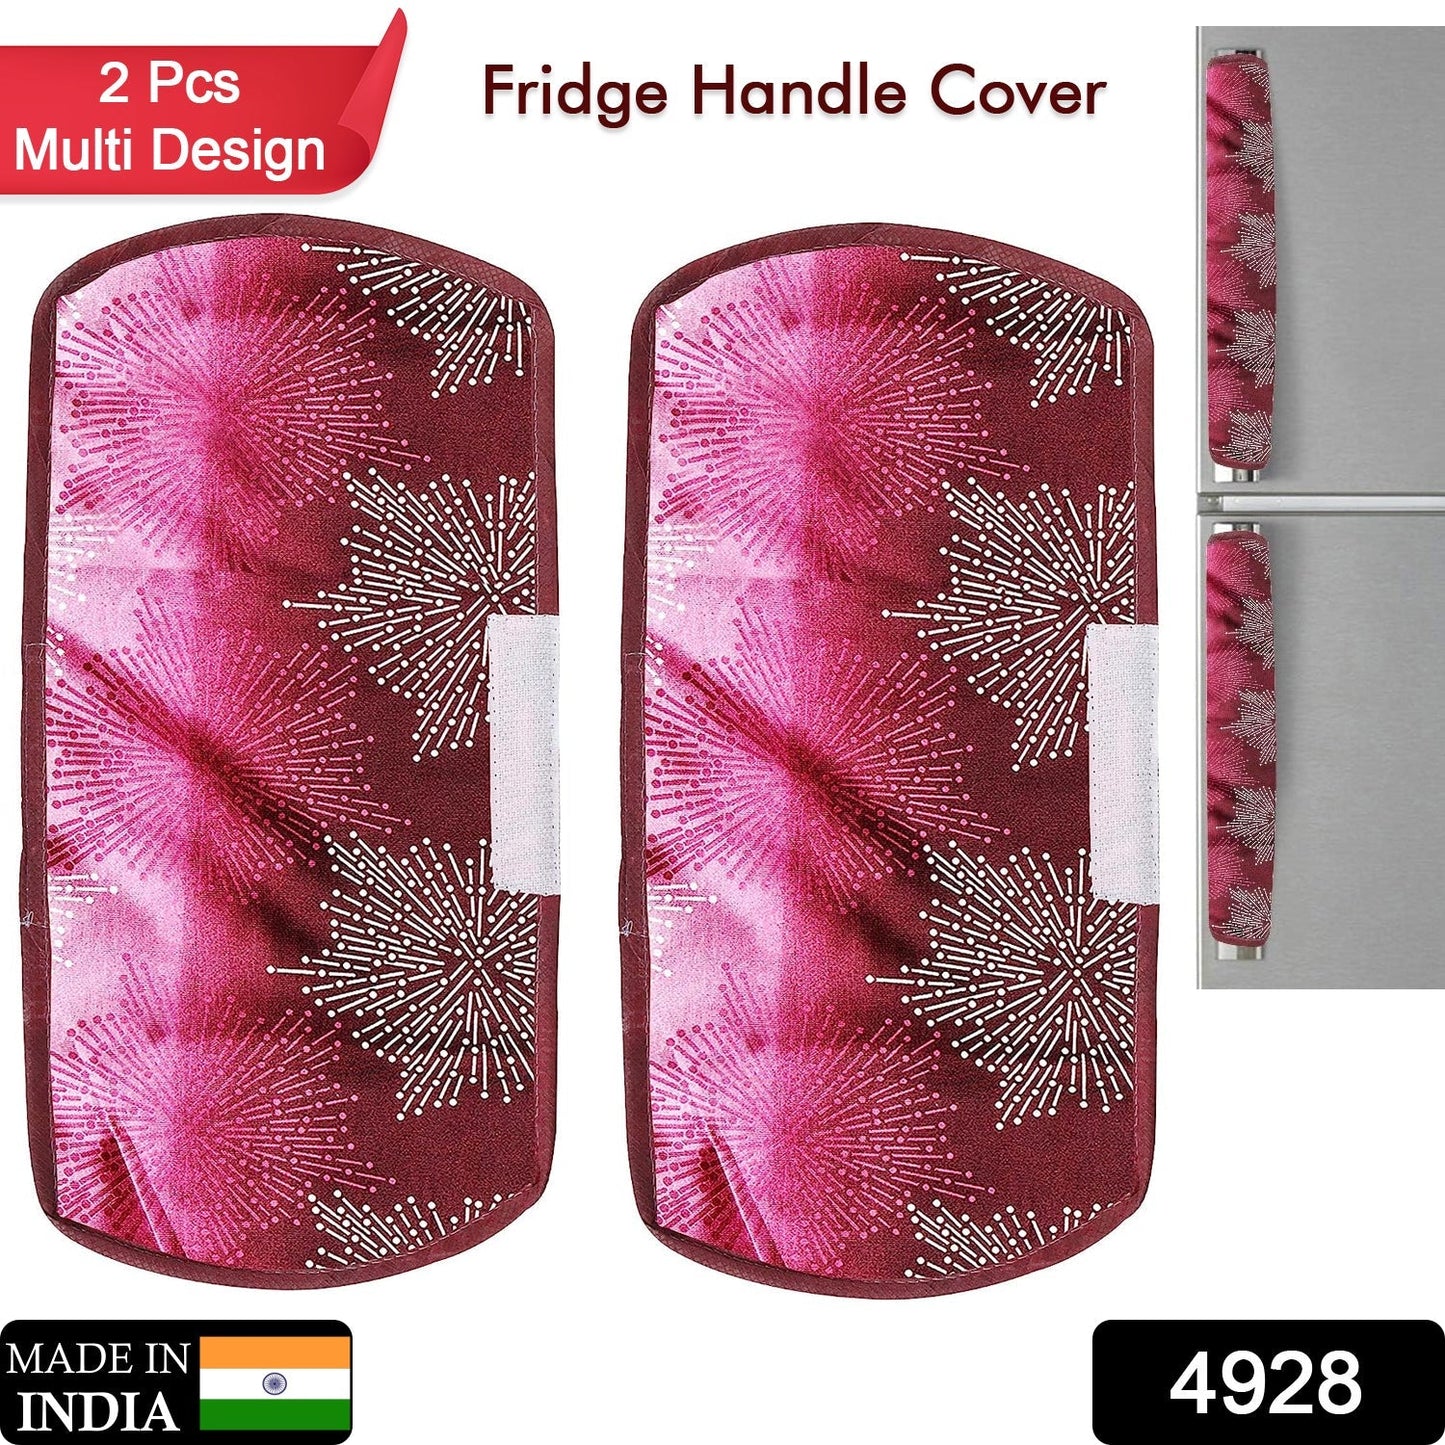 4928  Fridge Cover Handle Cover Polyester High Material Cover For All Fridge Handle Use ( Set Of 2 Pcs ) Multi Design